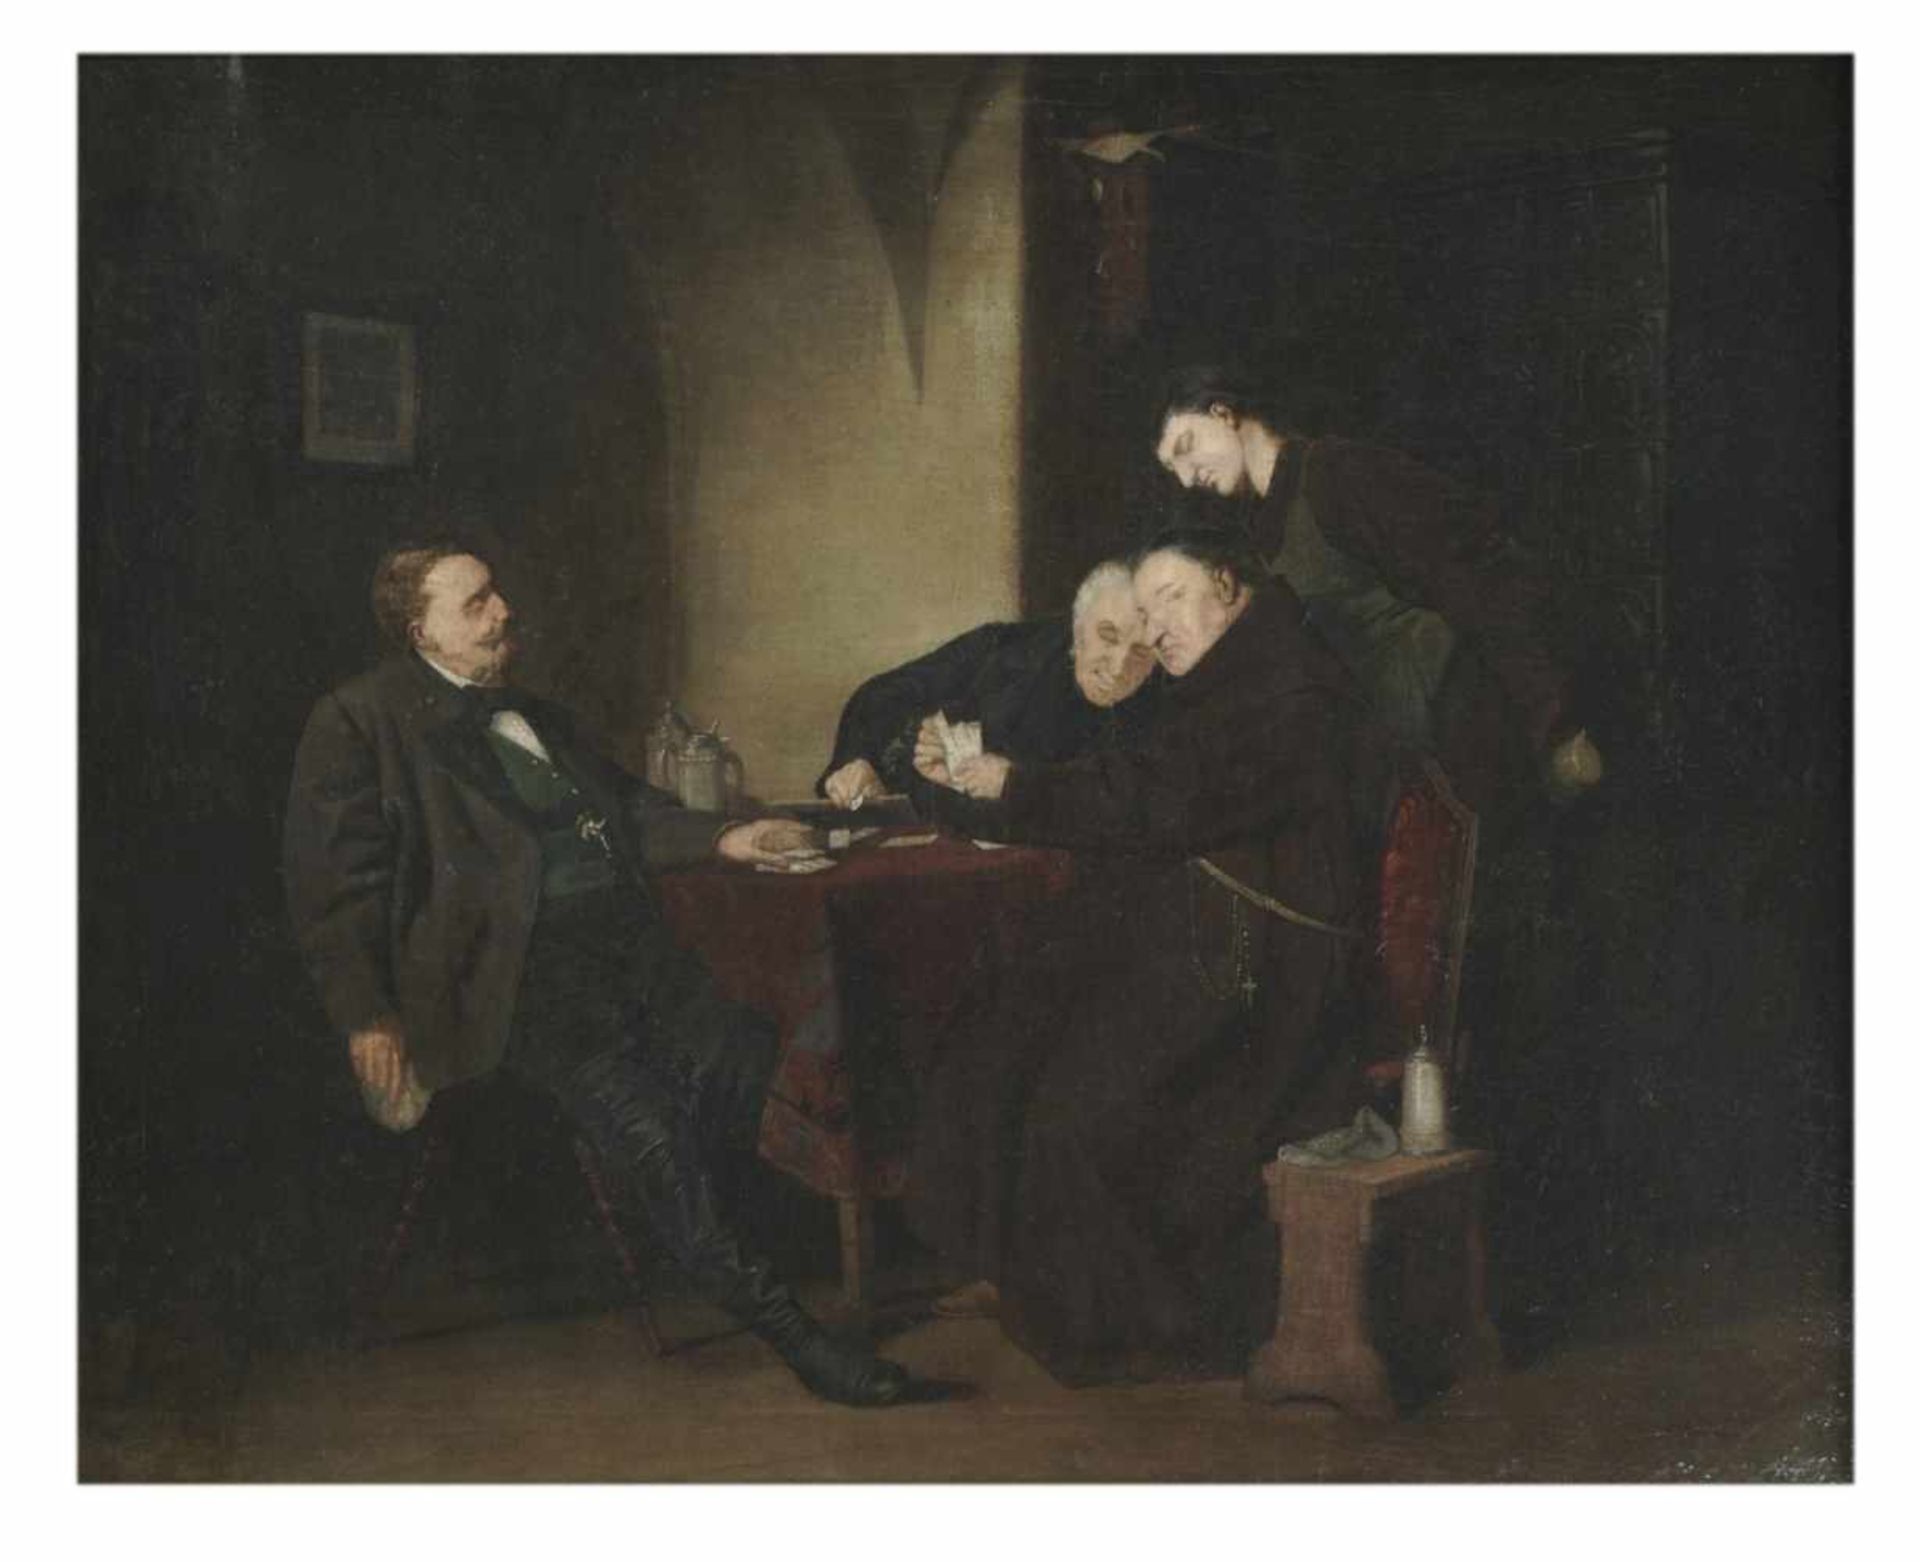 Savini, probably Alfonso Savini (1836-1908), At the card game, Oil on canvas, signed lower